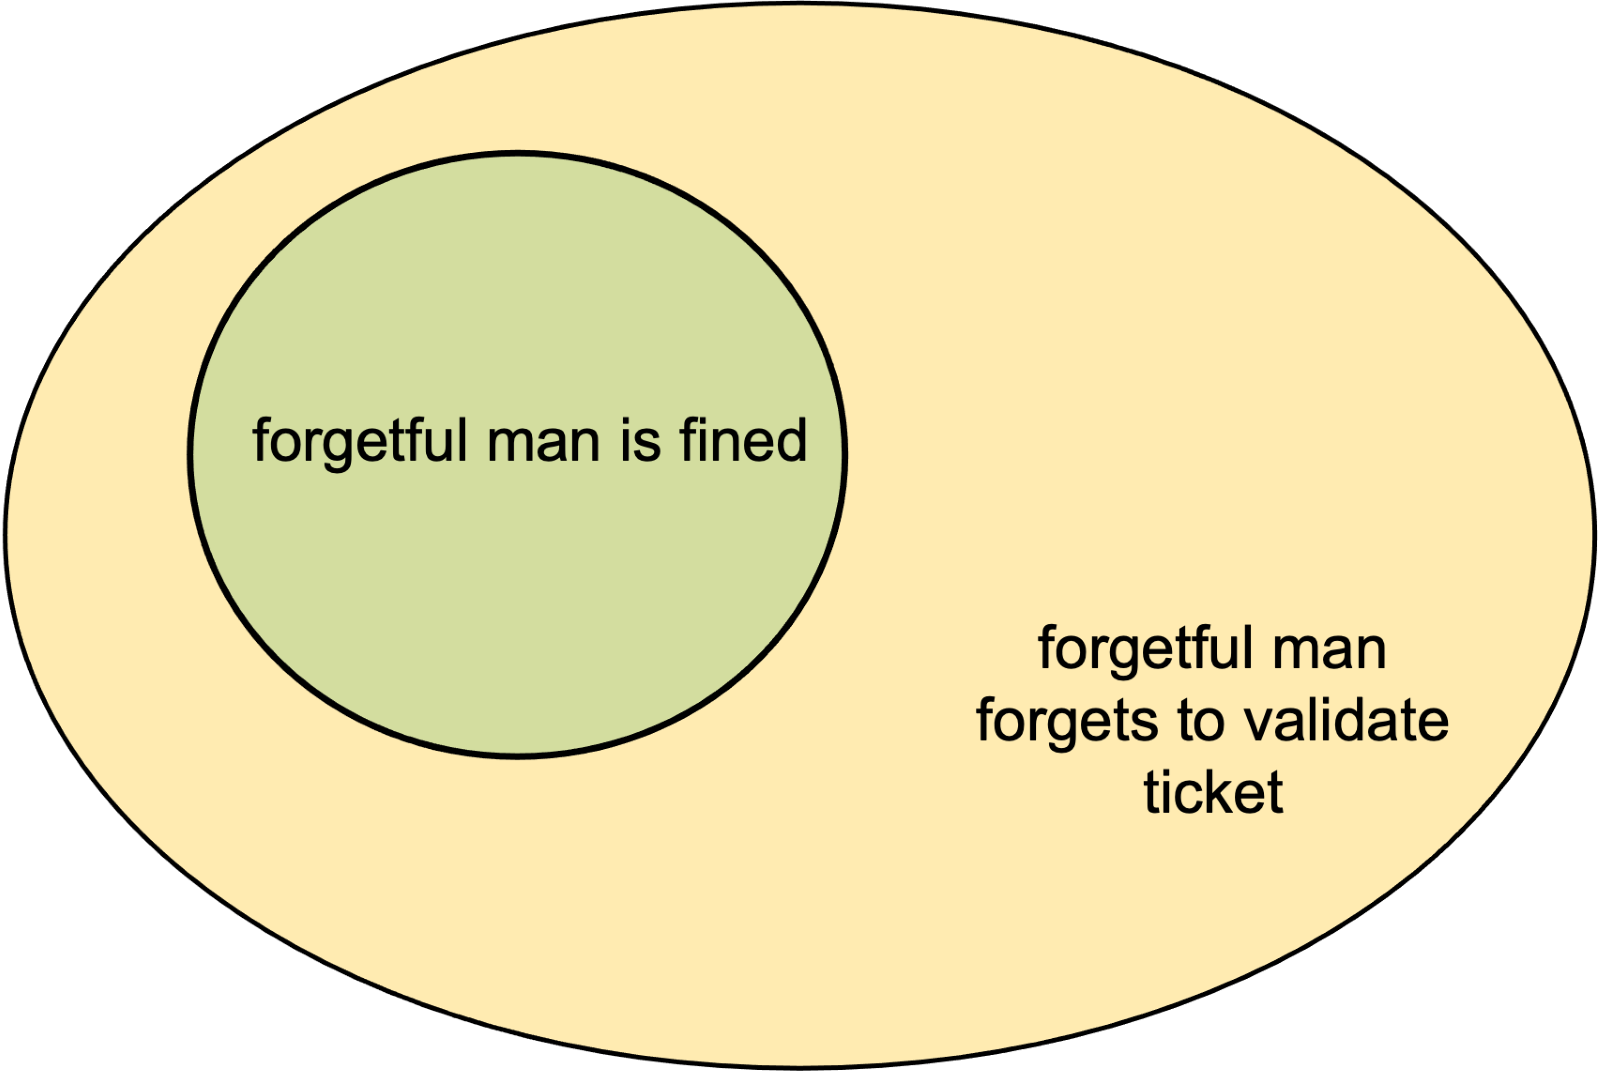 two circles, on within another. In the outer circle 'forgetful man forgets to validate ticket' and the inner circle 'forgetful man is fined'